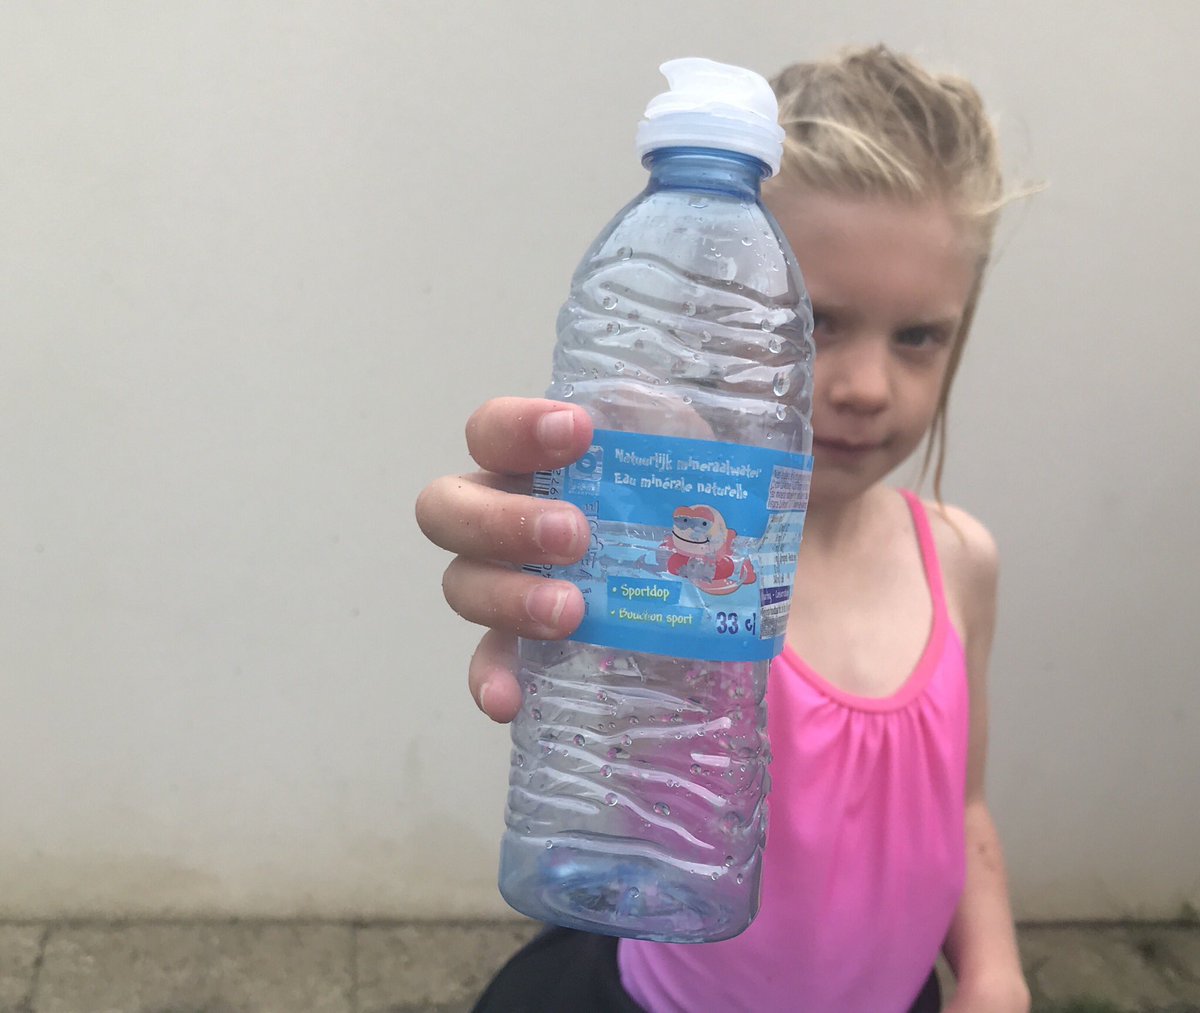 My daughter rescued this #plastic bottle 50m out to sea when surfing today. Do we call this plurfing? Let’s hope this doesn’t have to become a thing. #litter #plasticpollution #nextgeneration #yearofgreenaction #iwill4nature